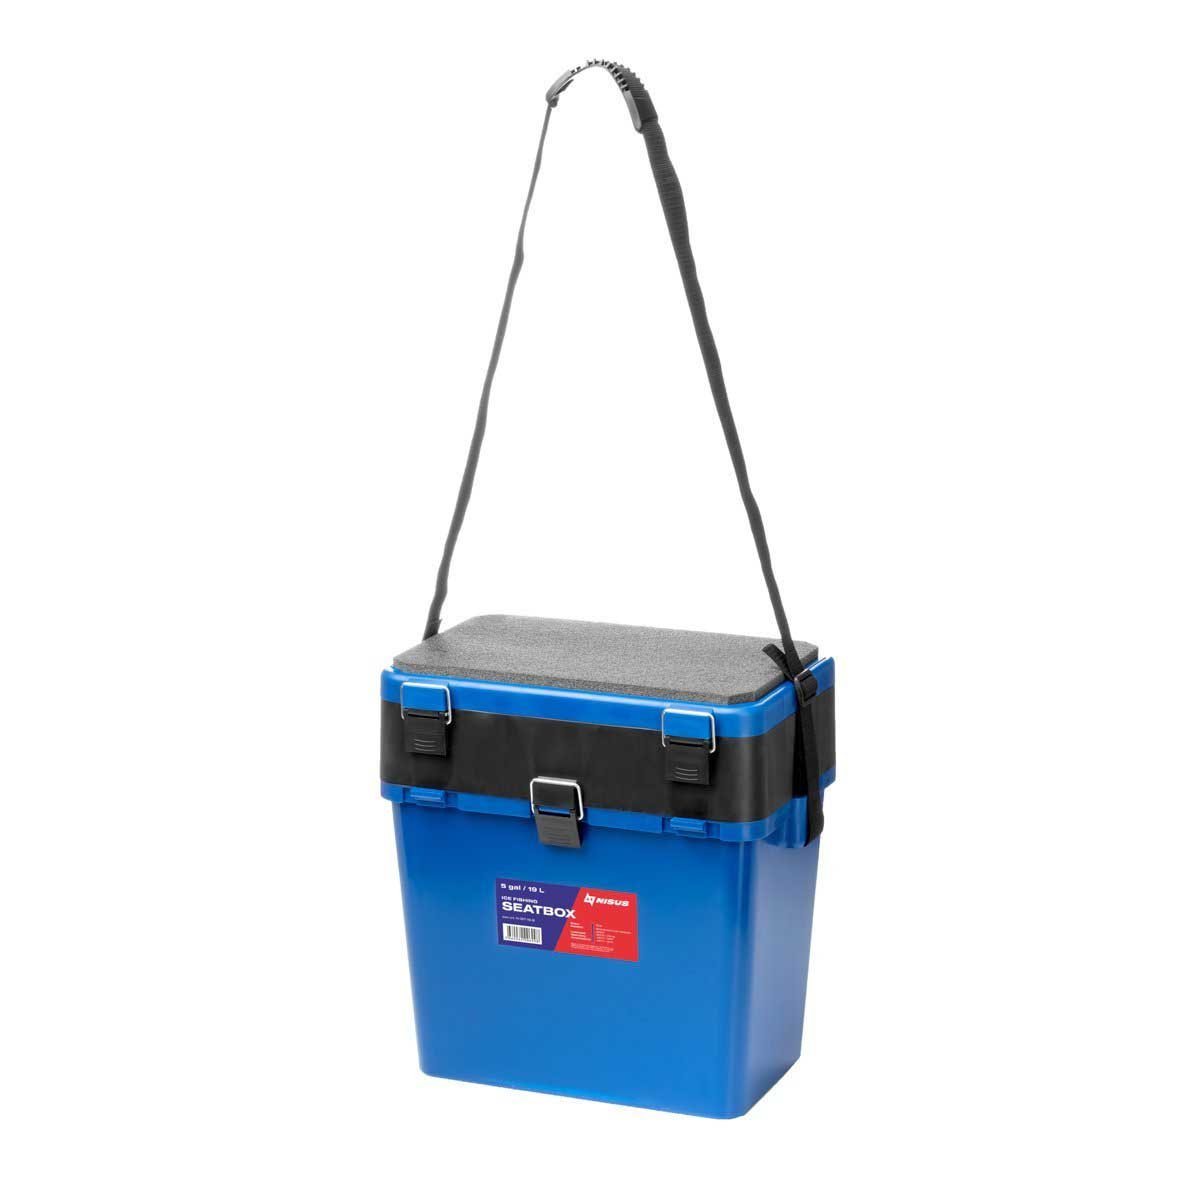 Ice Fishing Bucket Type Box with Seat and Adjustable Shoulder Strap | 2 compartments | 5 gal | blue color